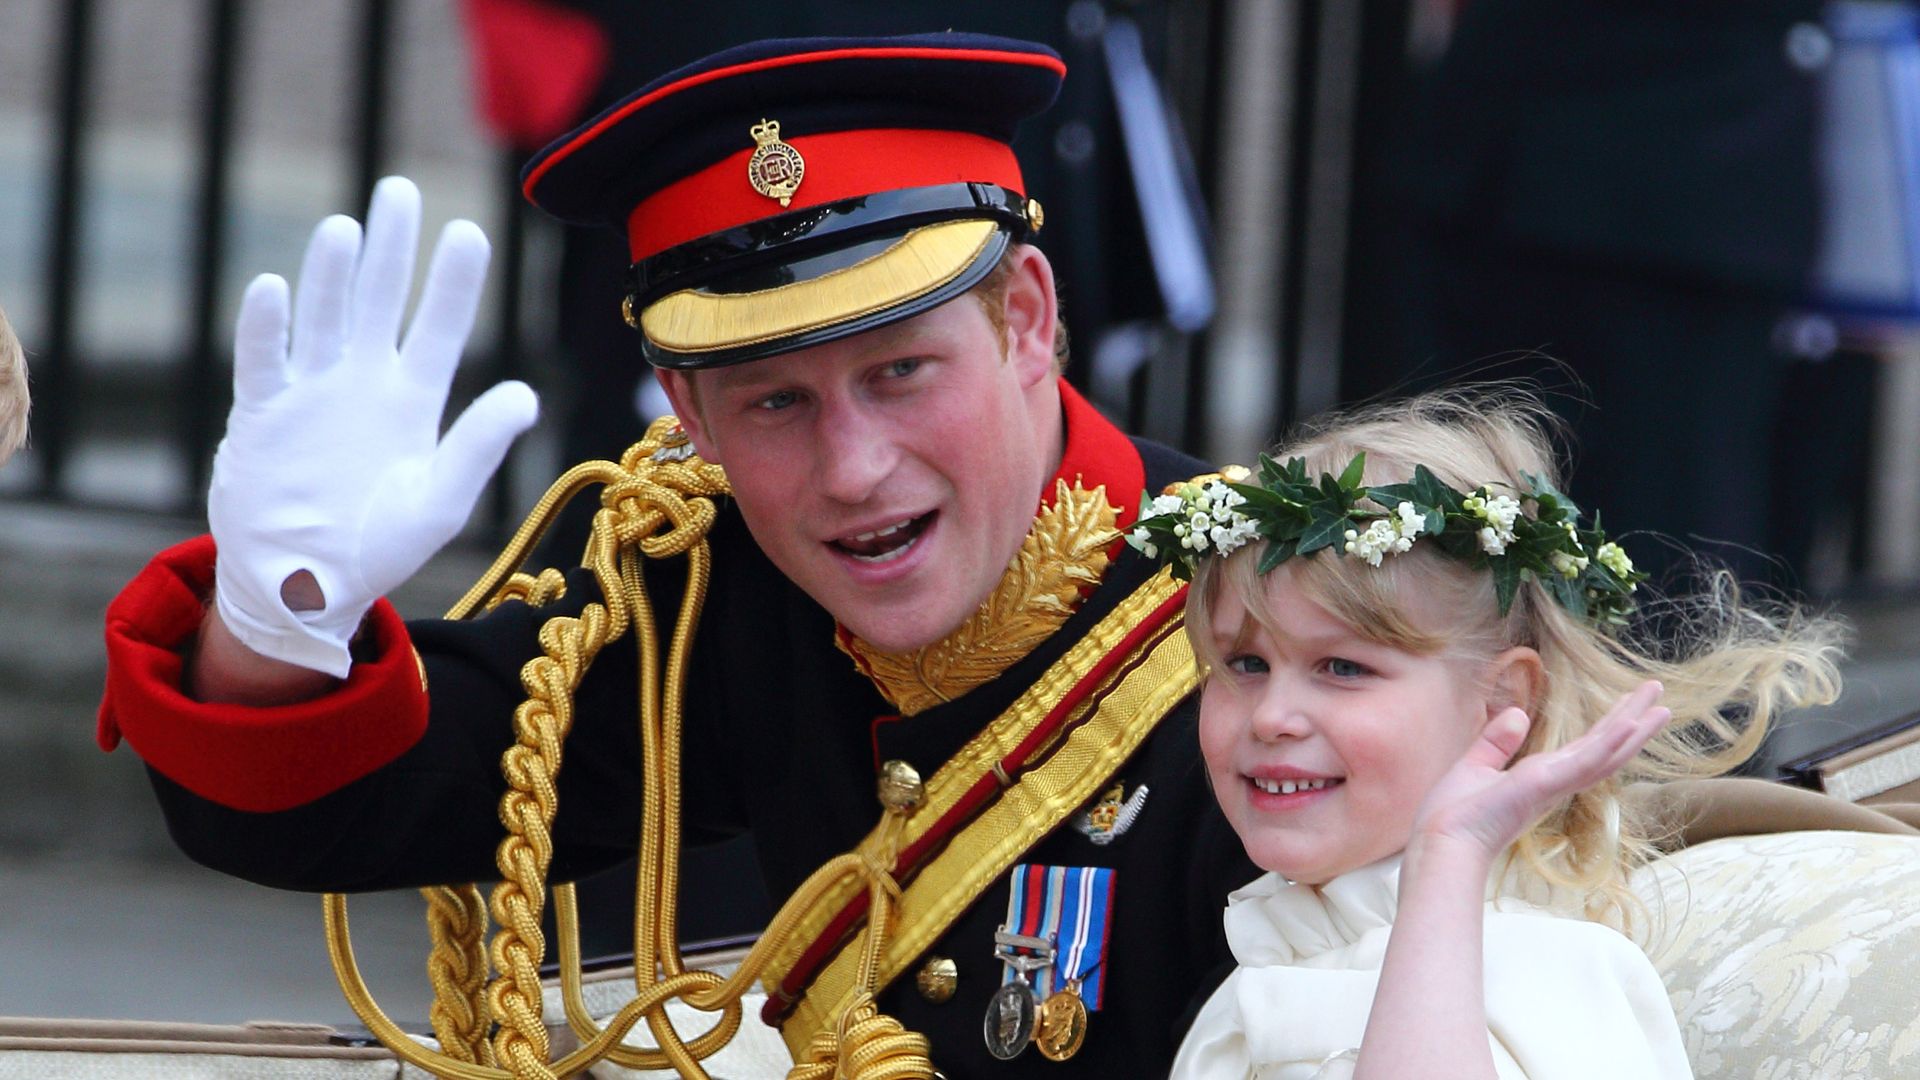 Lady Louise Windsor and Prince Harry waving following Prince William's wedding to Kate Middleton